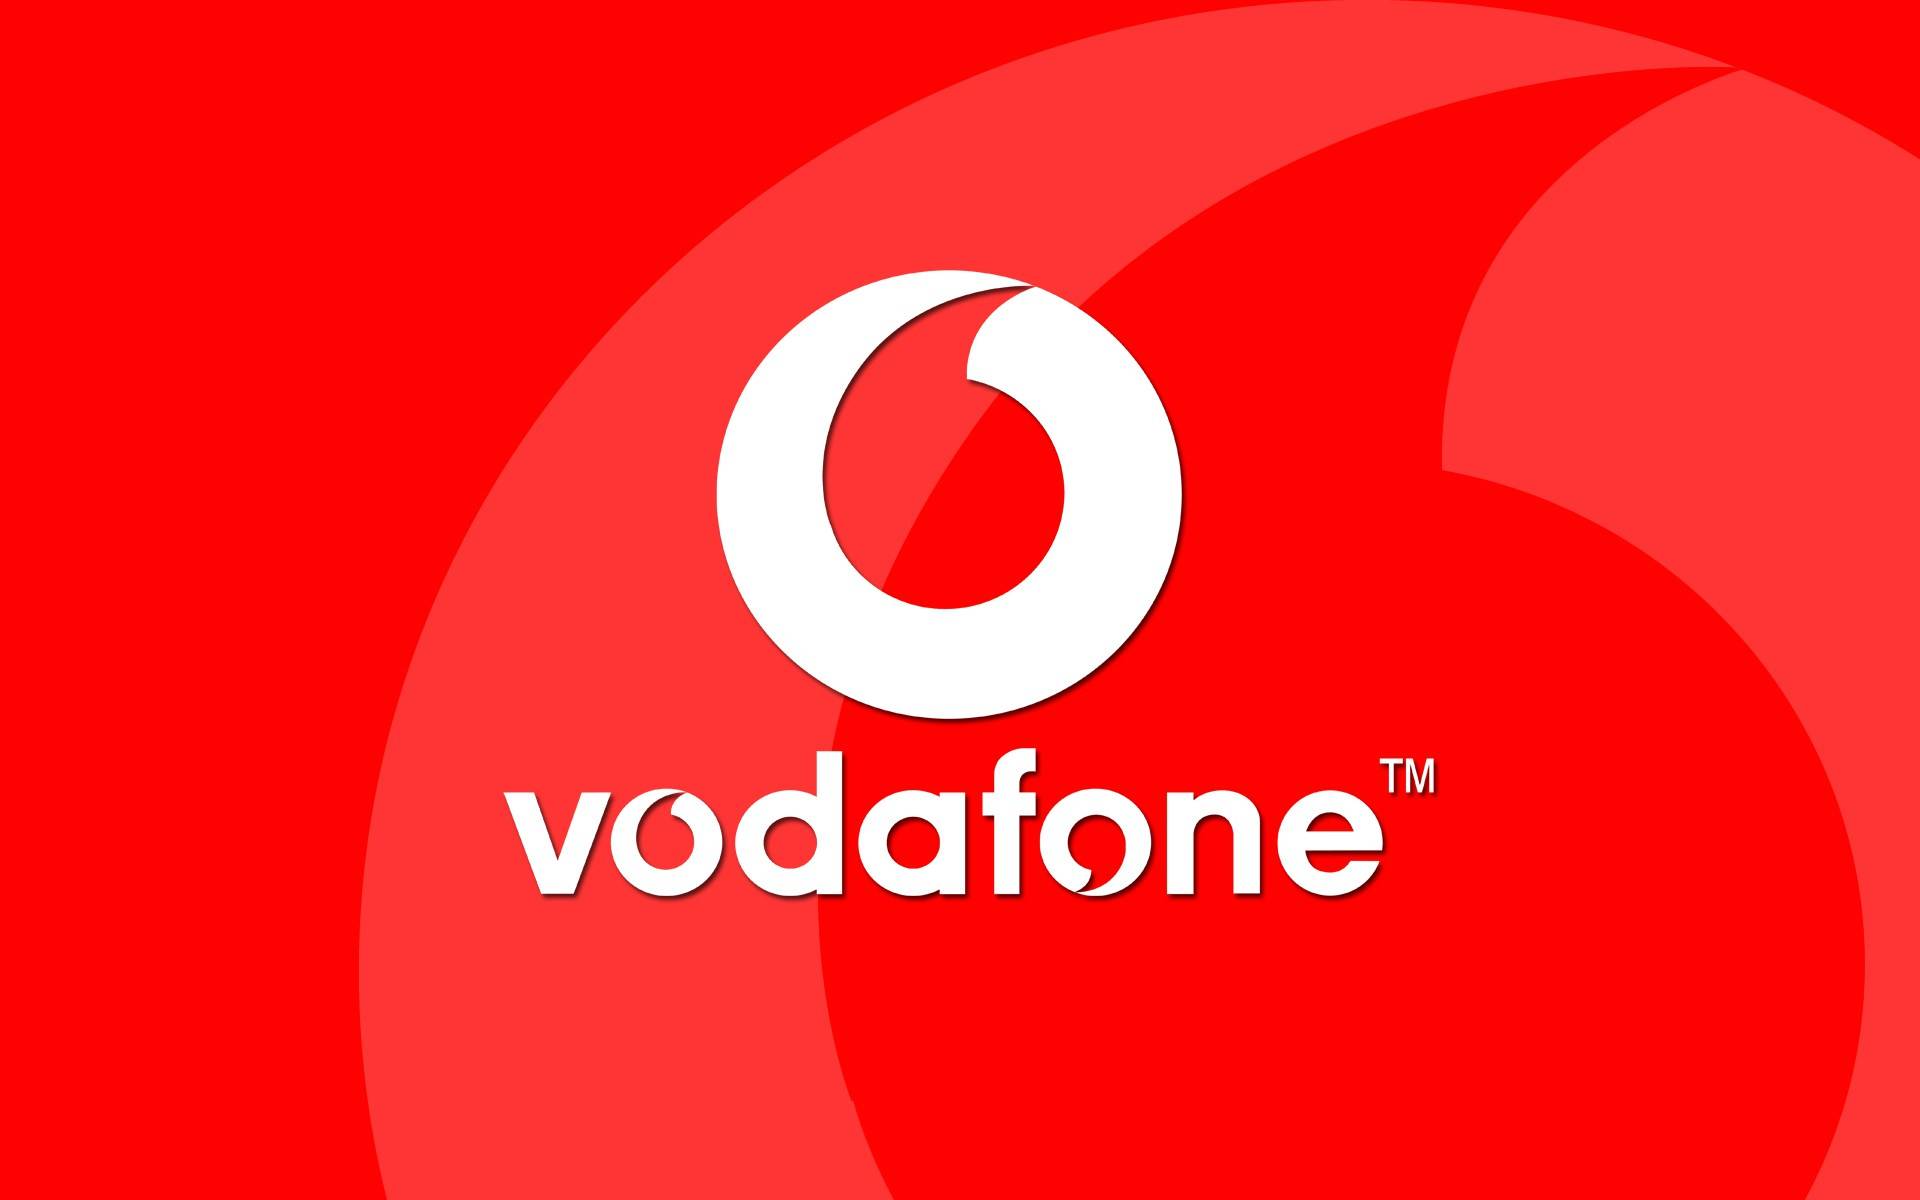 Vodafone. September 2 with Smartphones whose prices are MUCH Reduced